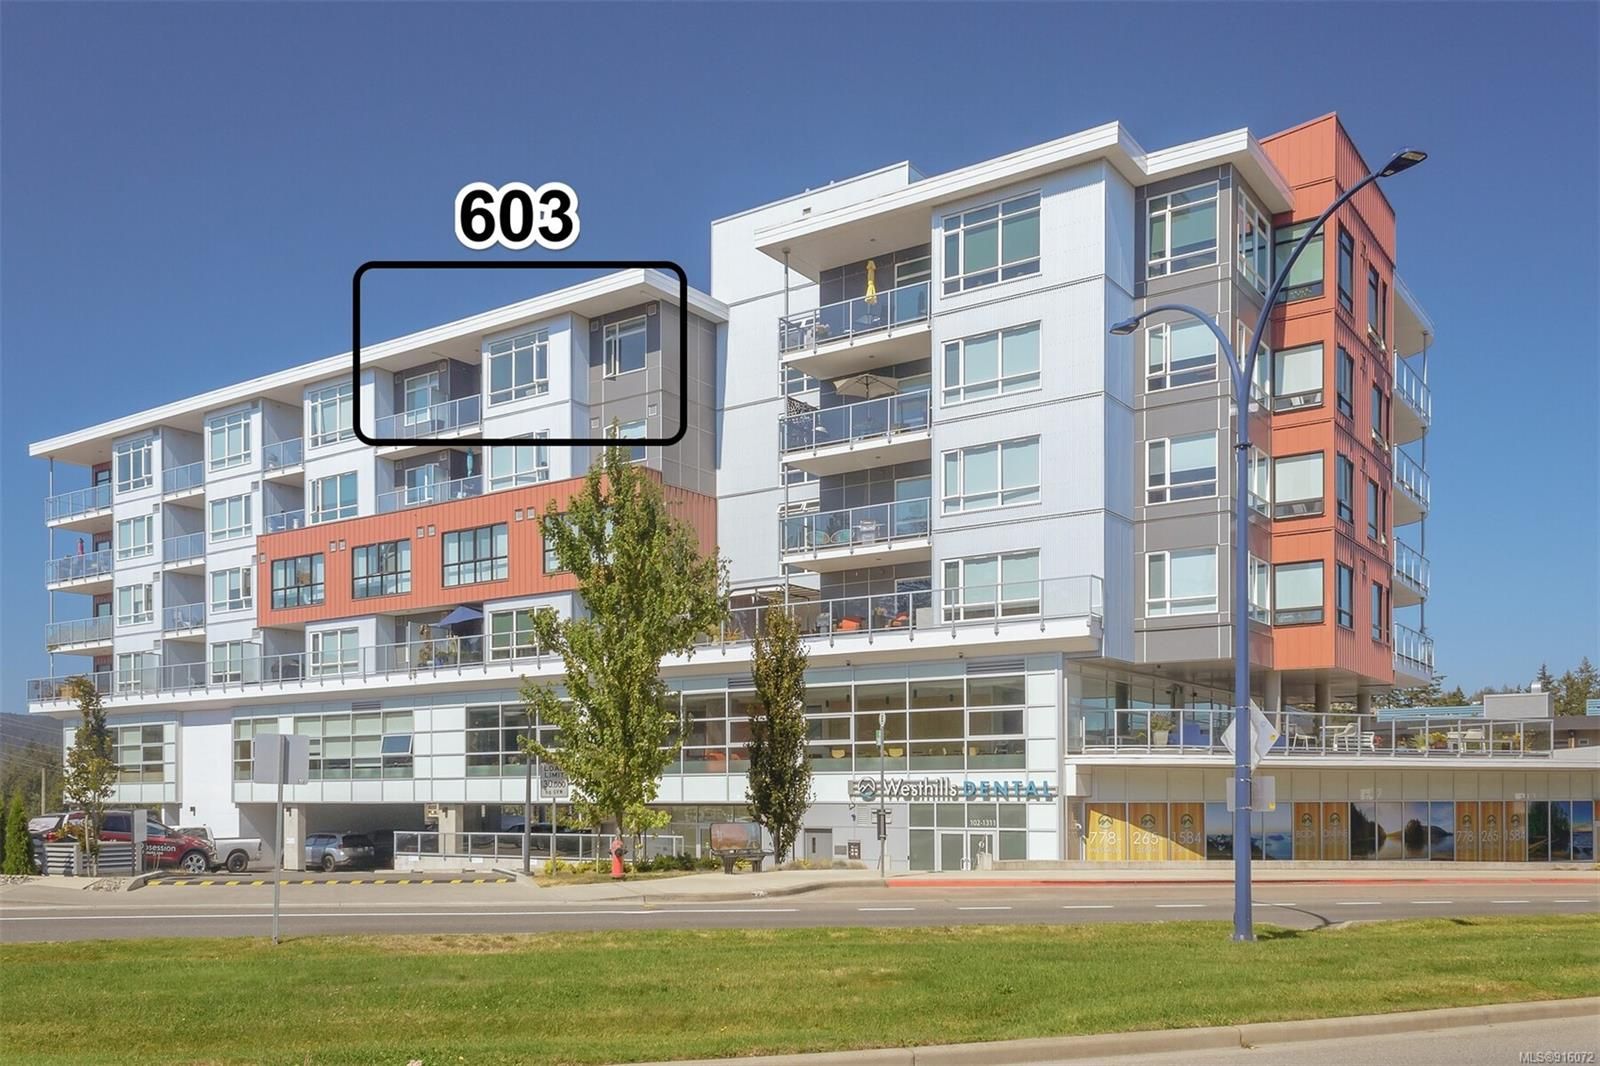 I have sold a property at 603 1311 Lakepoint Way in Langford
